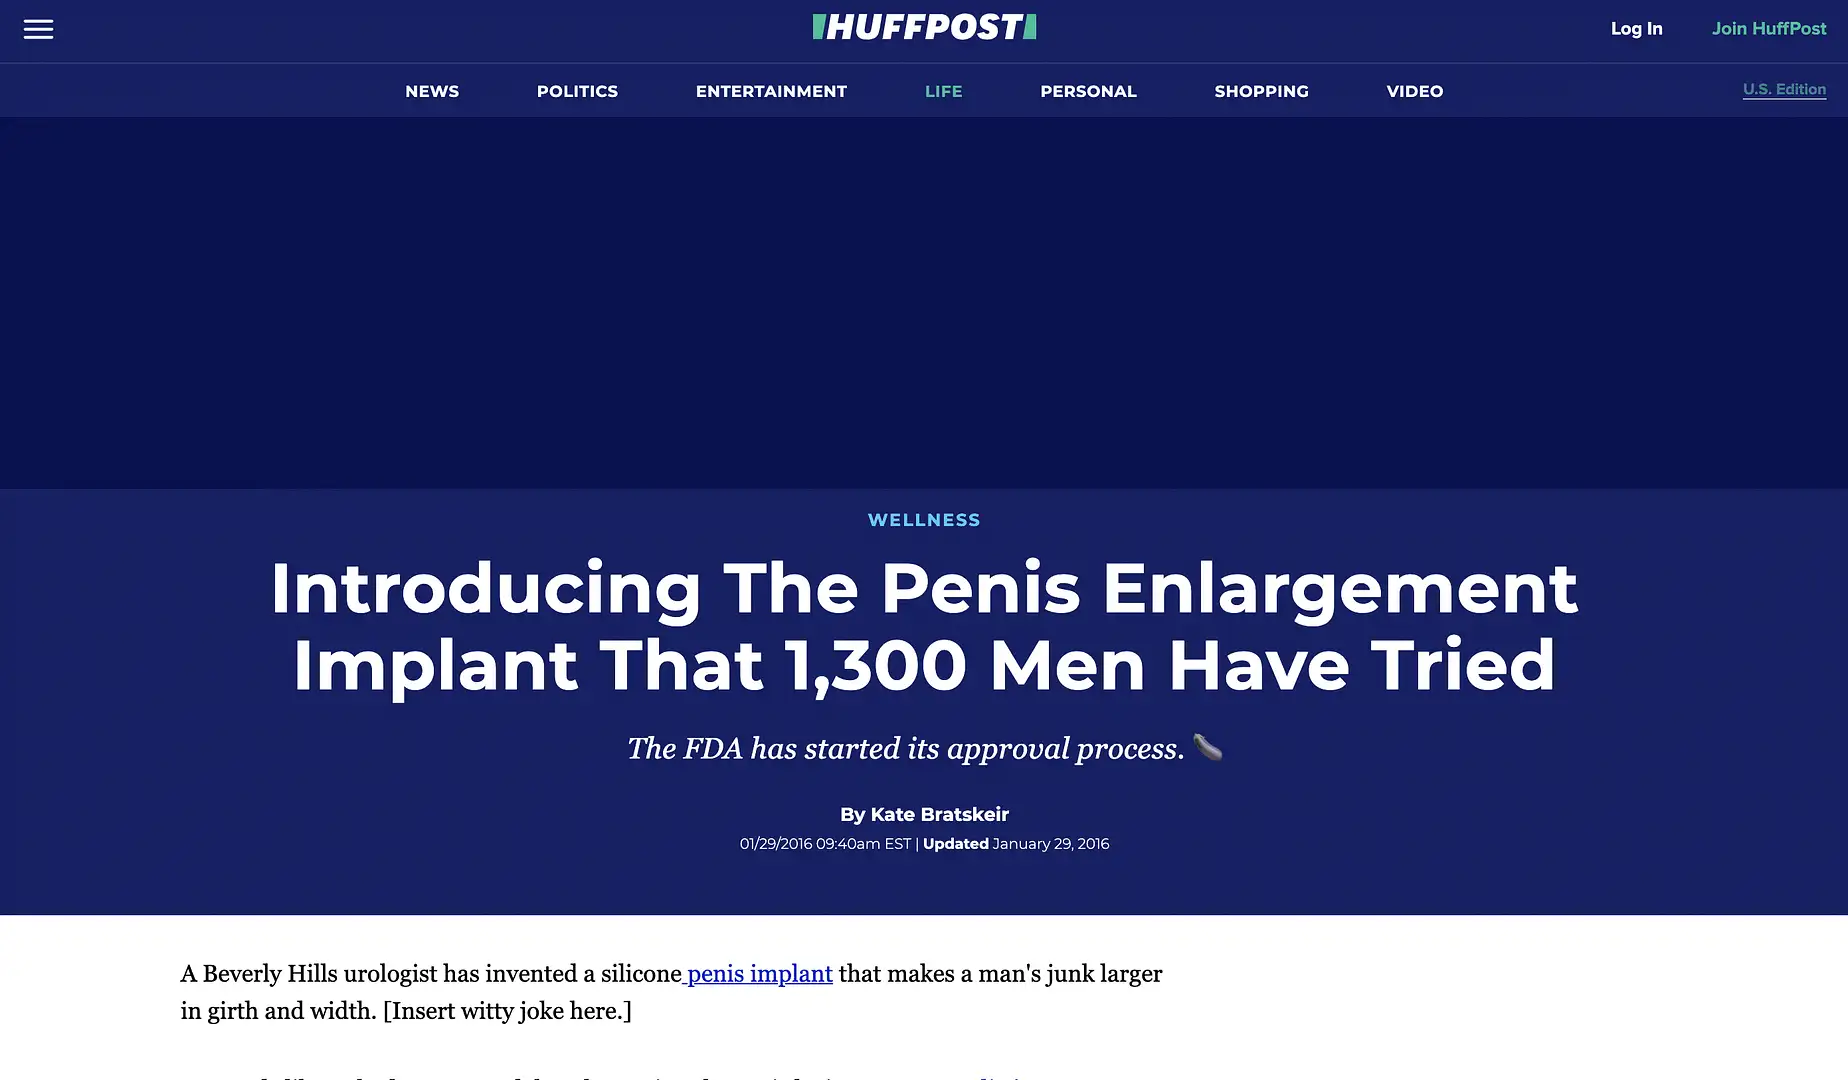 INTRODUCING THE PENIS ENLARGEMENT IMPLANT THAT 1,300 MEN HAVE TRIED